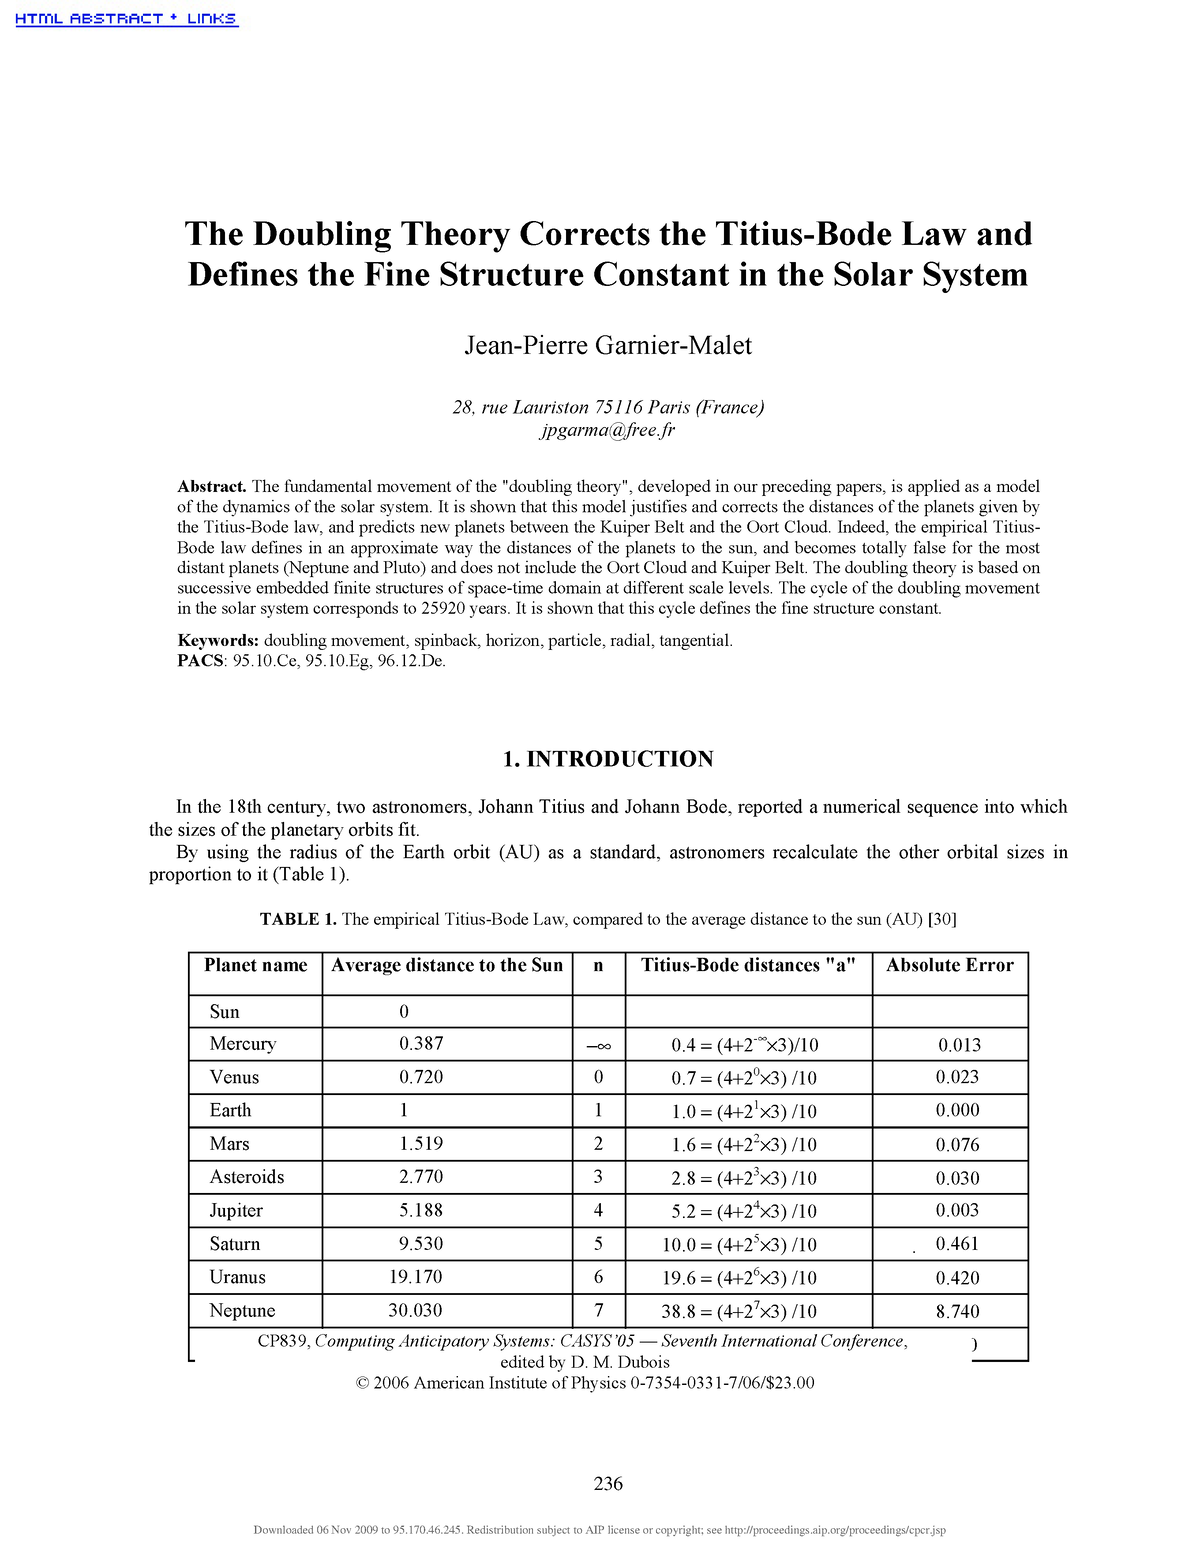 The doubling theory - The Doubling Theory Corrects the Titius-Bode Law ...